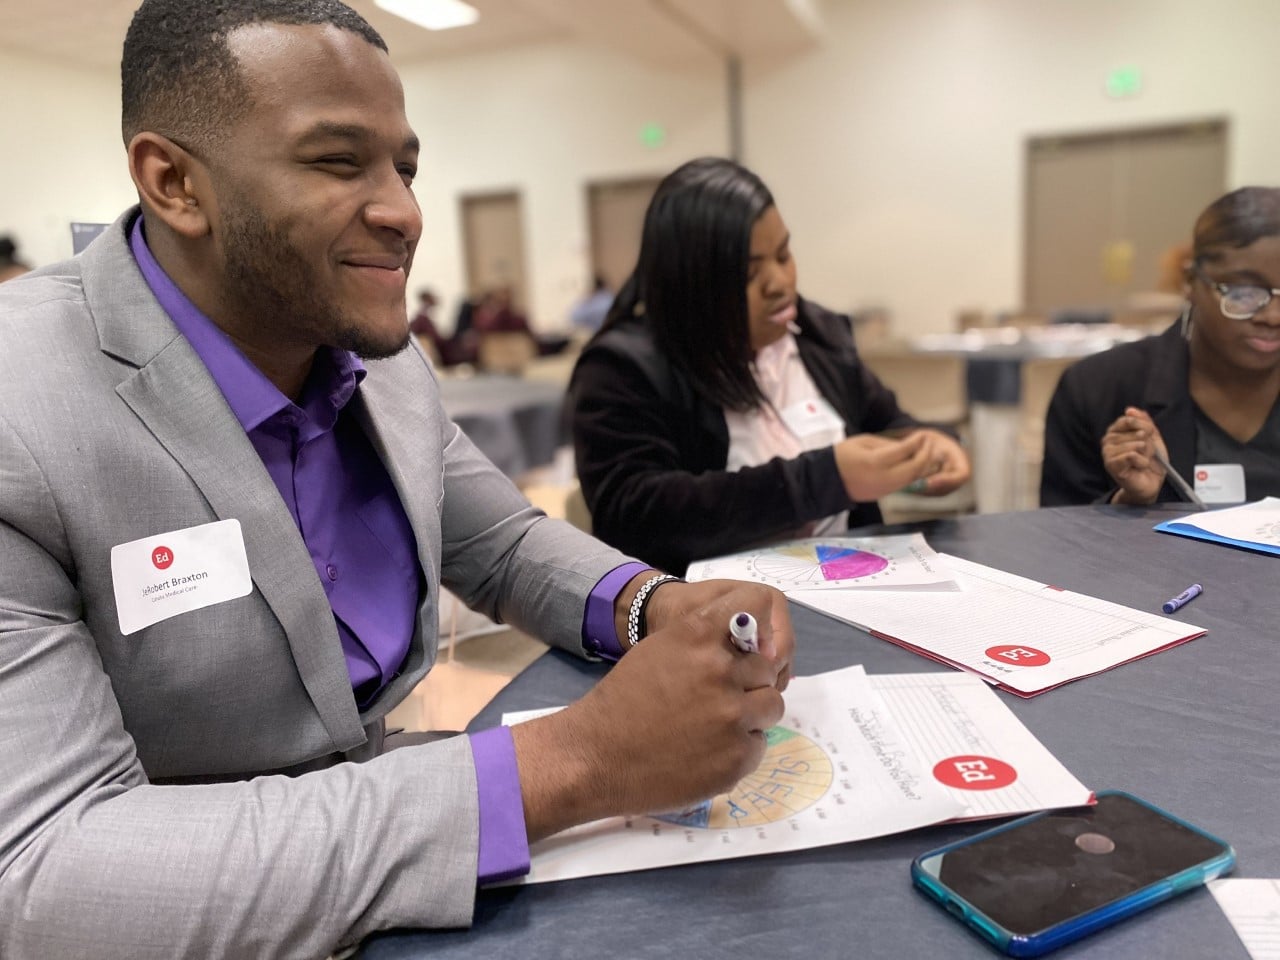 Birmingham Ed 1 College, career and life ready: get to know the Birmingham Education Foundation